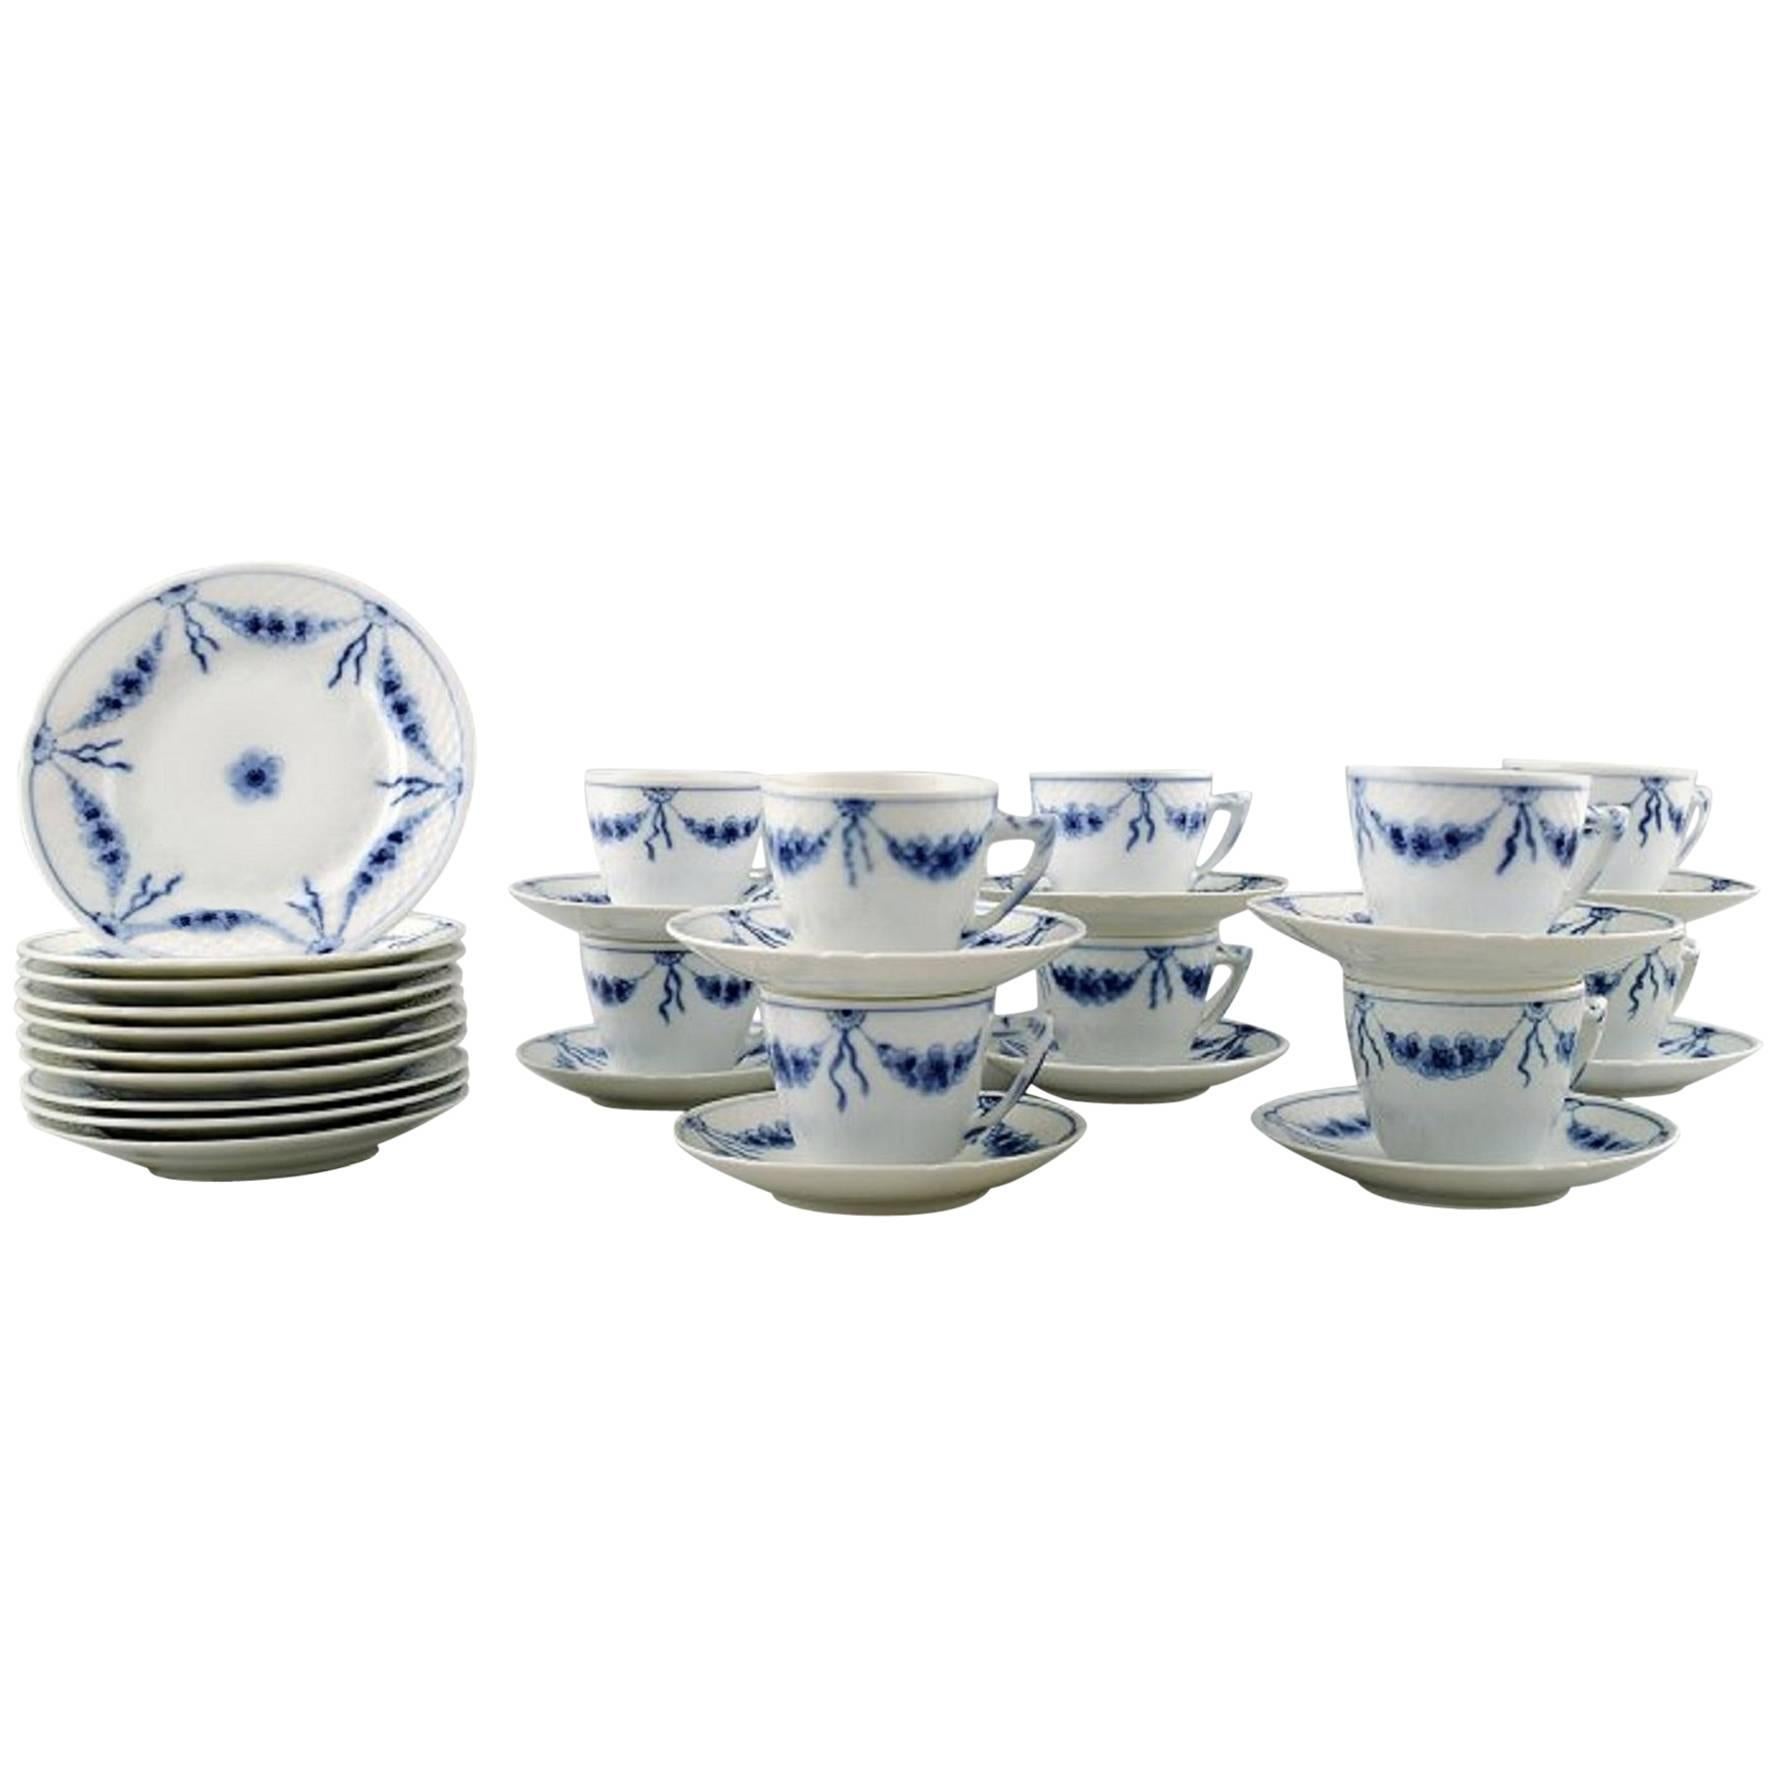 Empire B&G 10 p. Coffee Service, Bing and Grondahl, B&G No. 102 For Sale